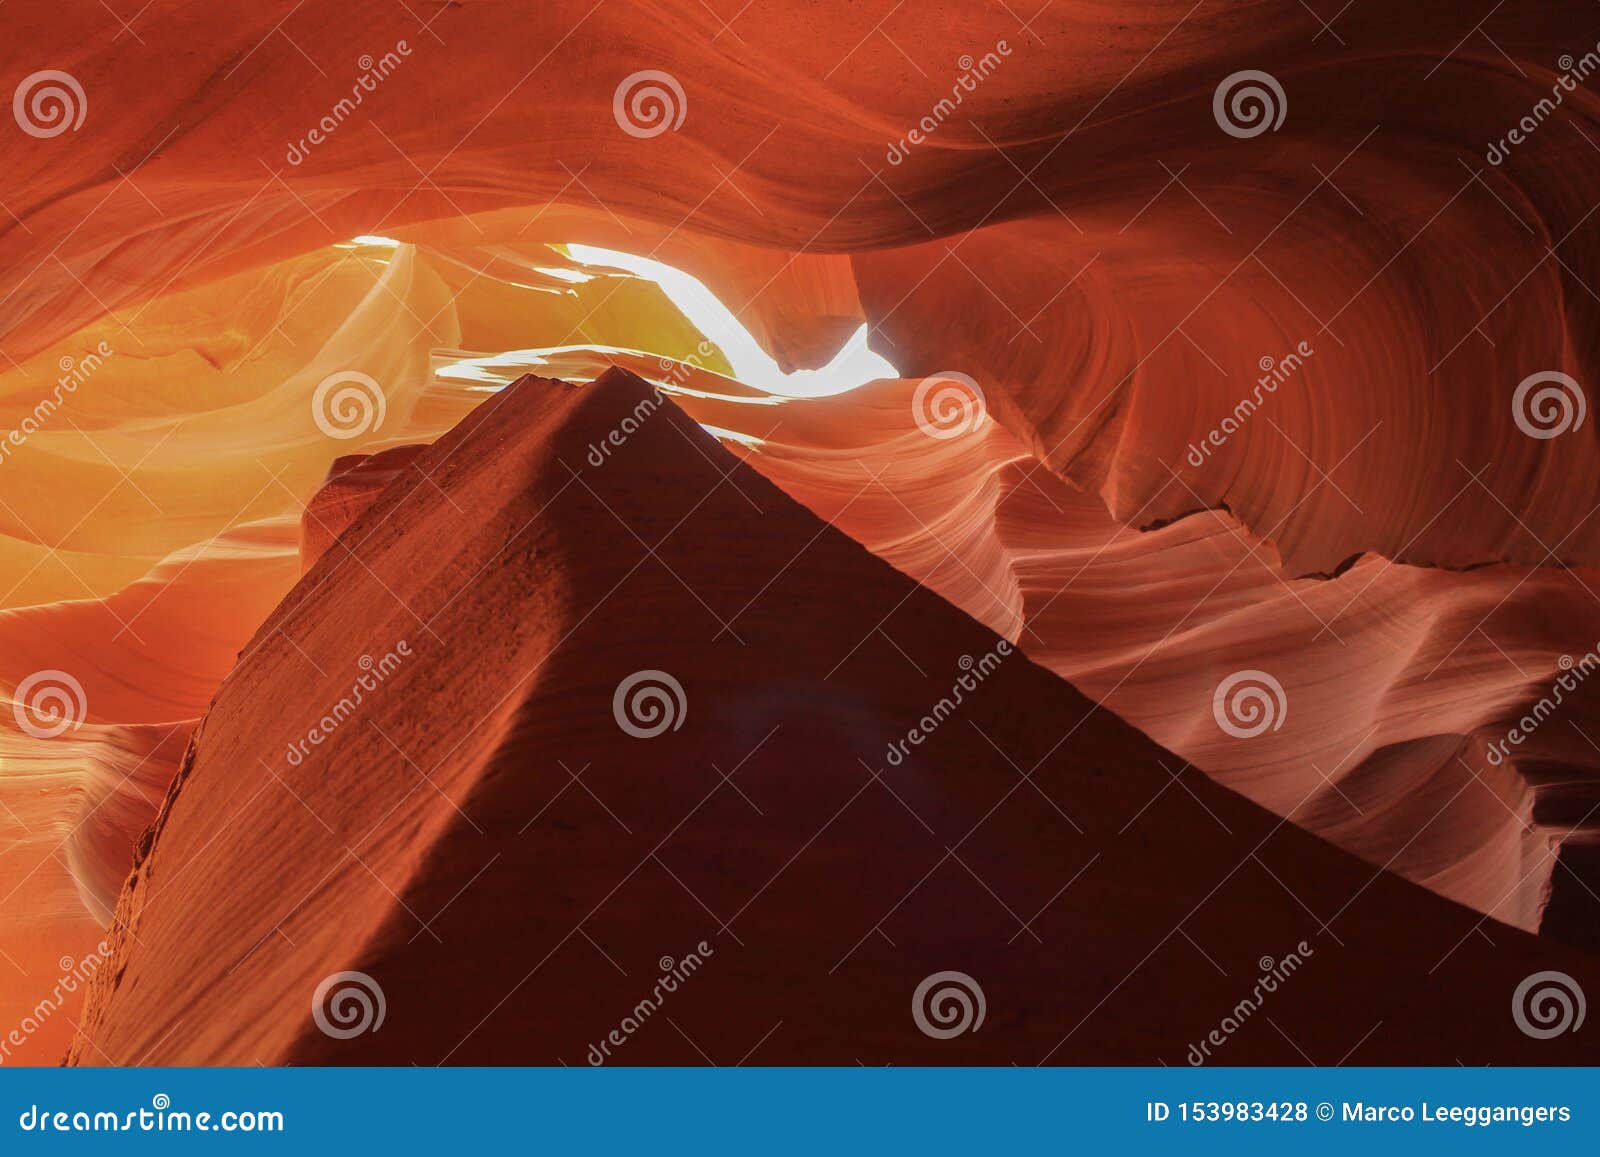 Background Or Wallpaper Picture From Antelope Canyon Red Stone Stock Photo Image Of Colored Beauty